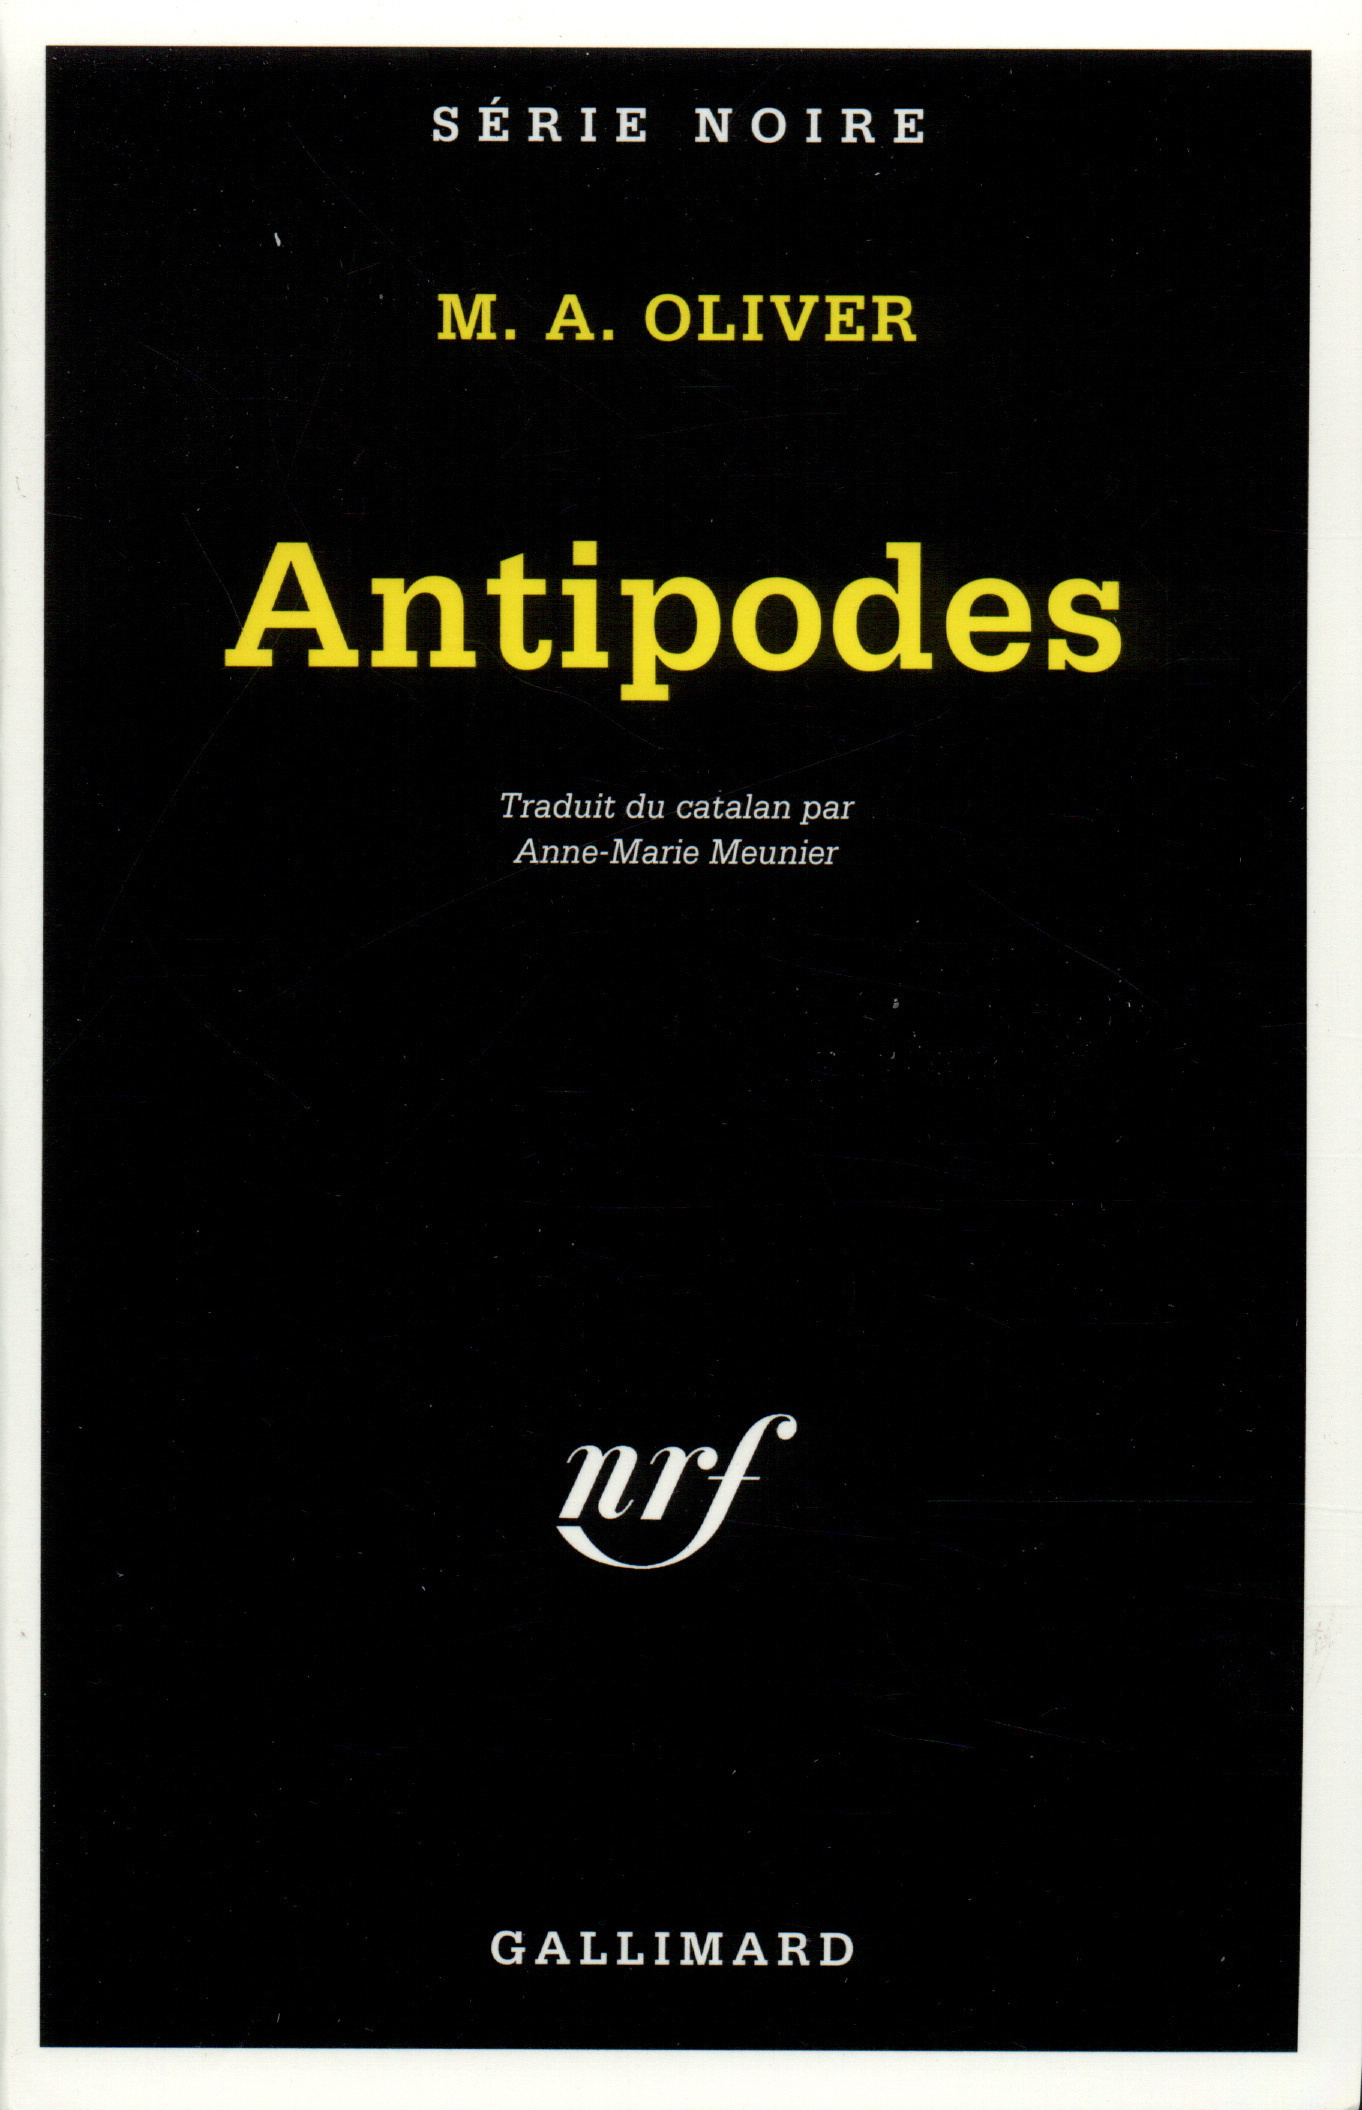 Antipodes (9782070494033-front-cover)